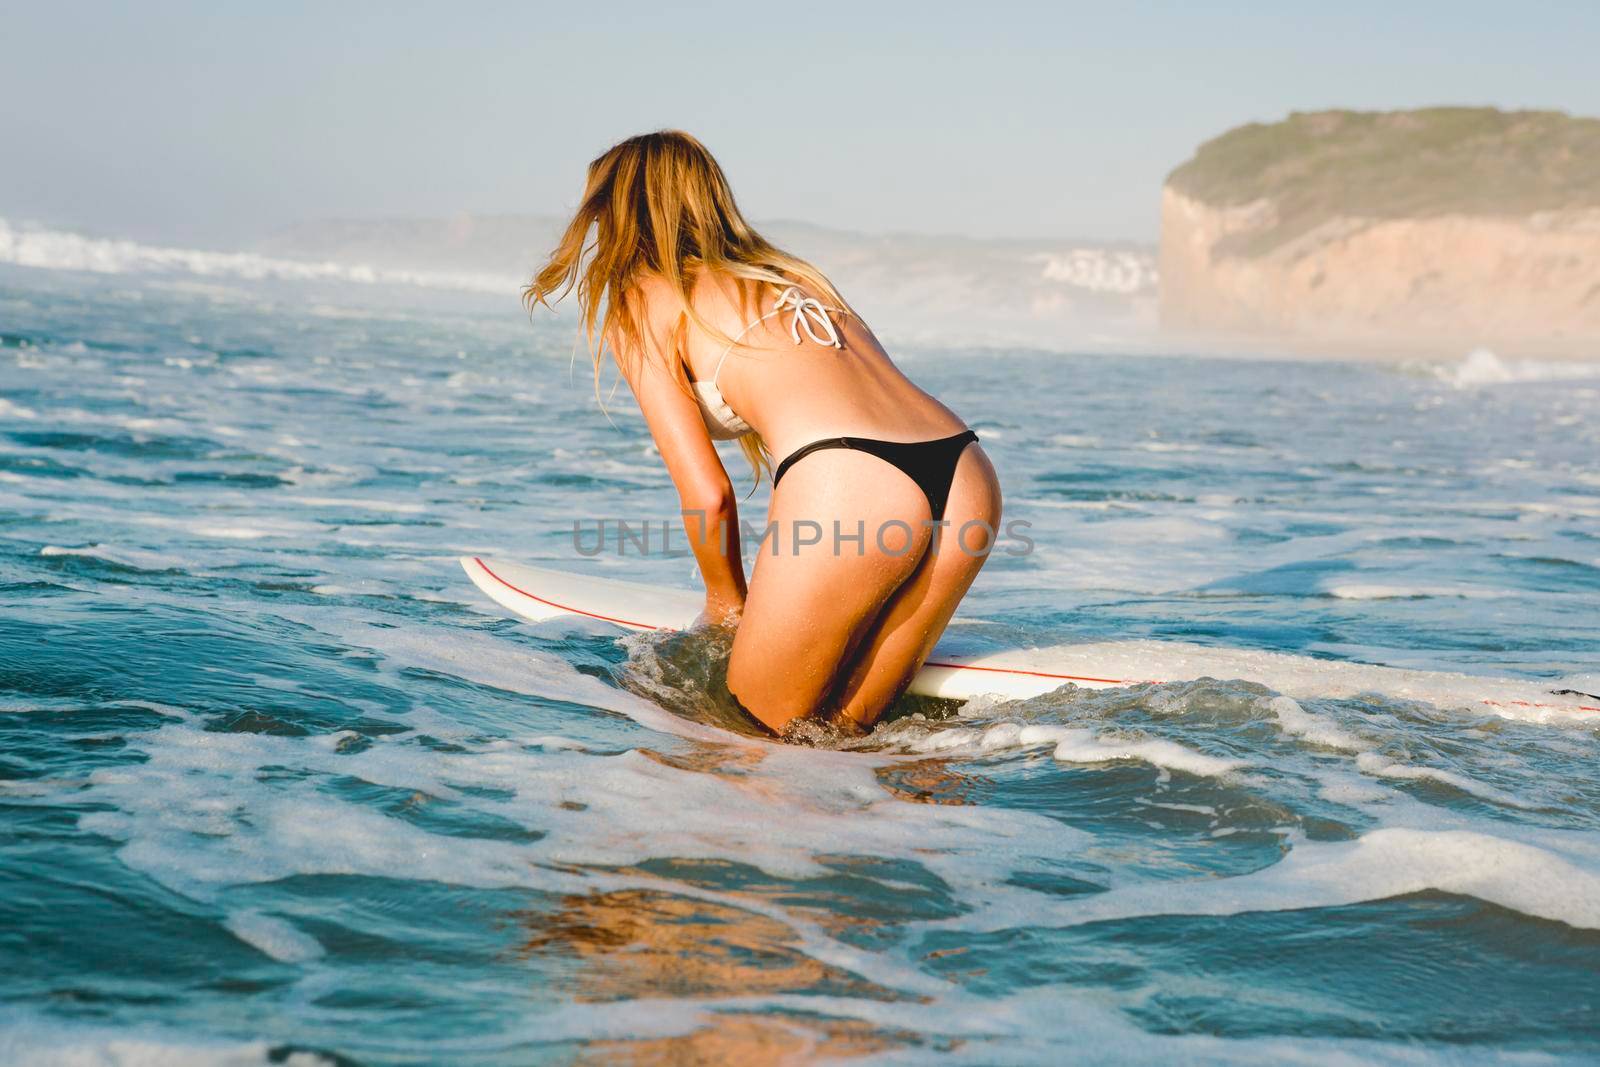 Surfer Girl by Iko